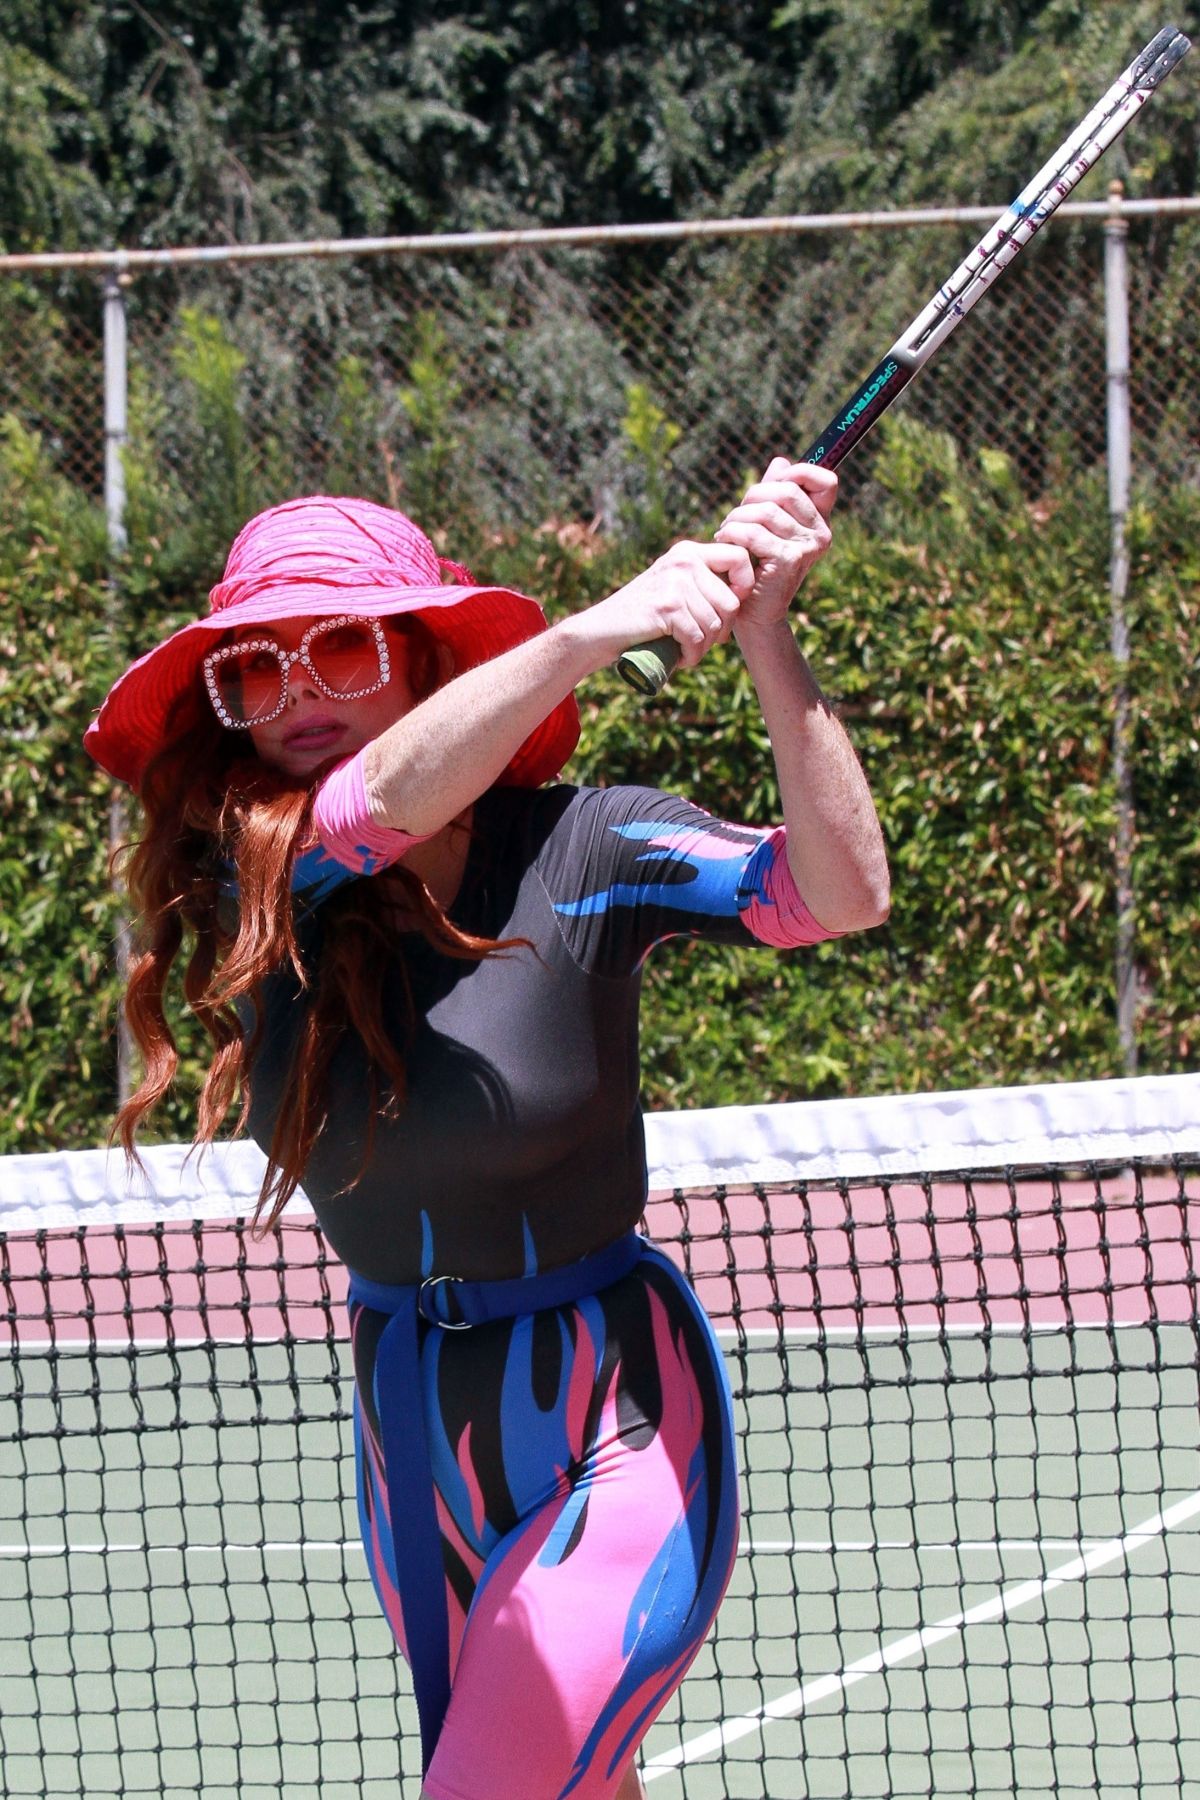 Phoebe Price At A Tennis Court In Los Angeles